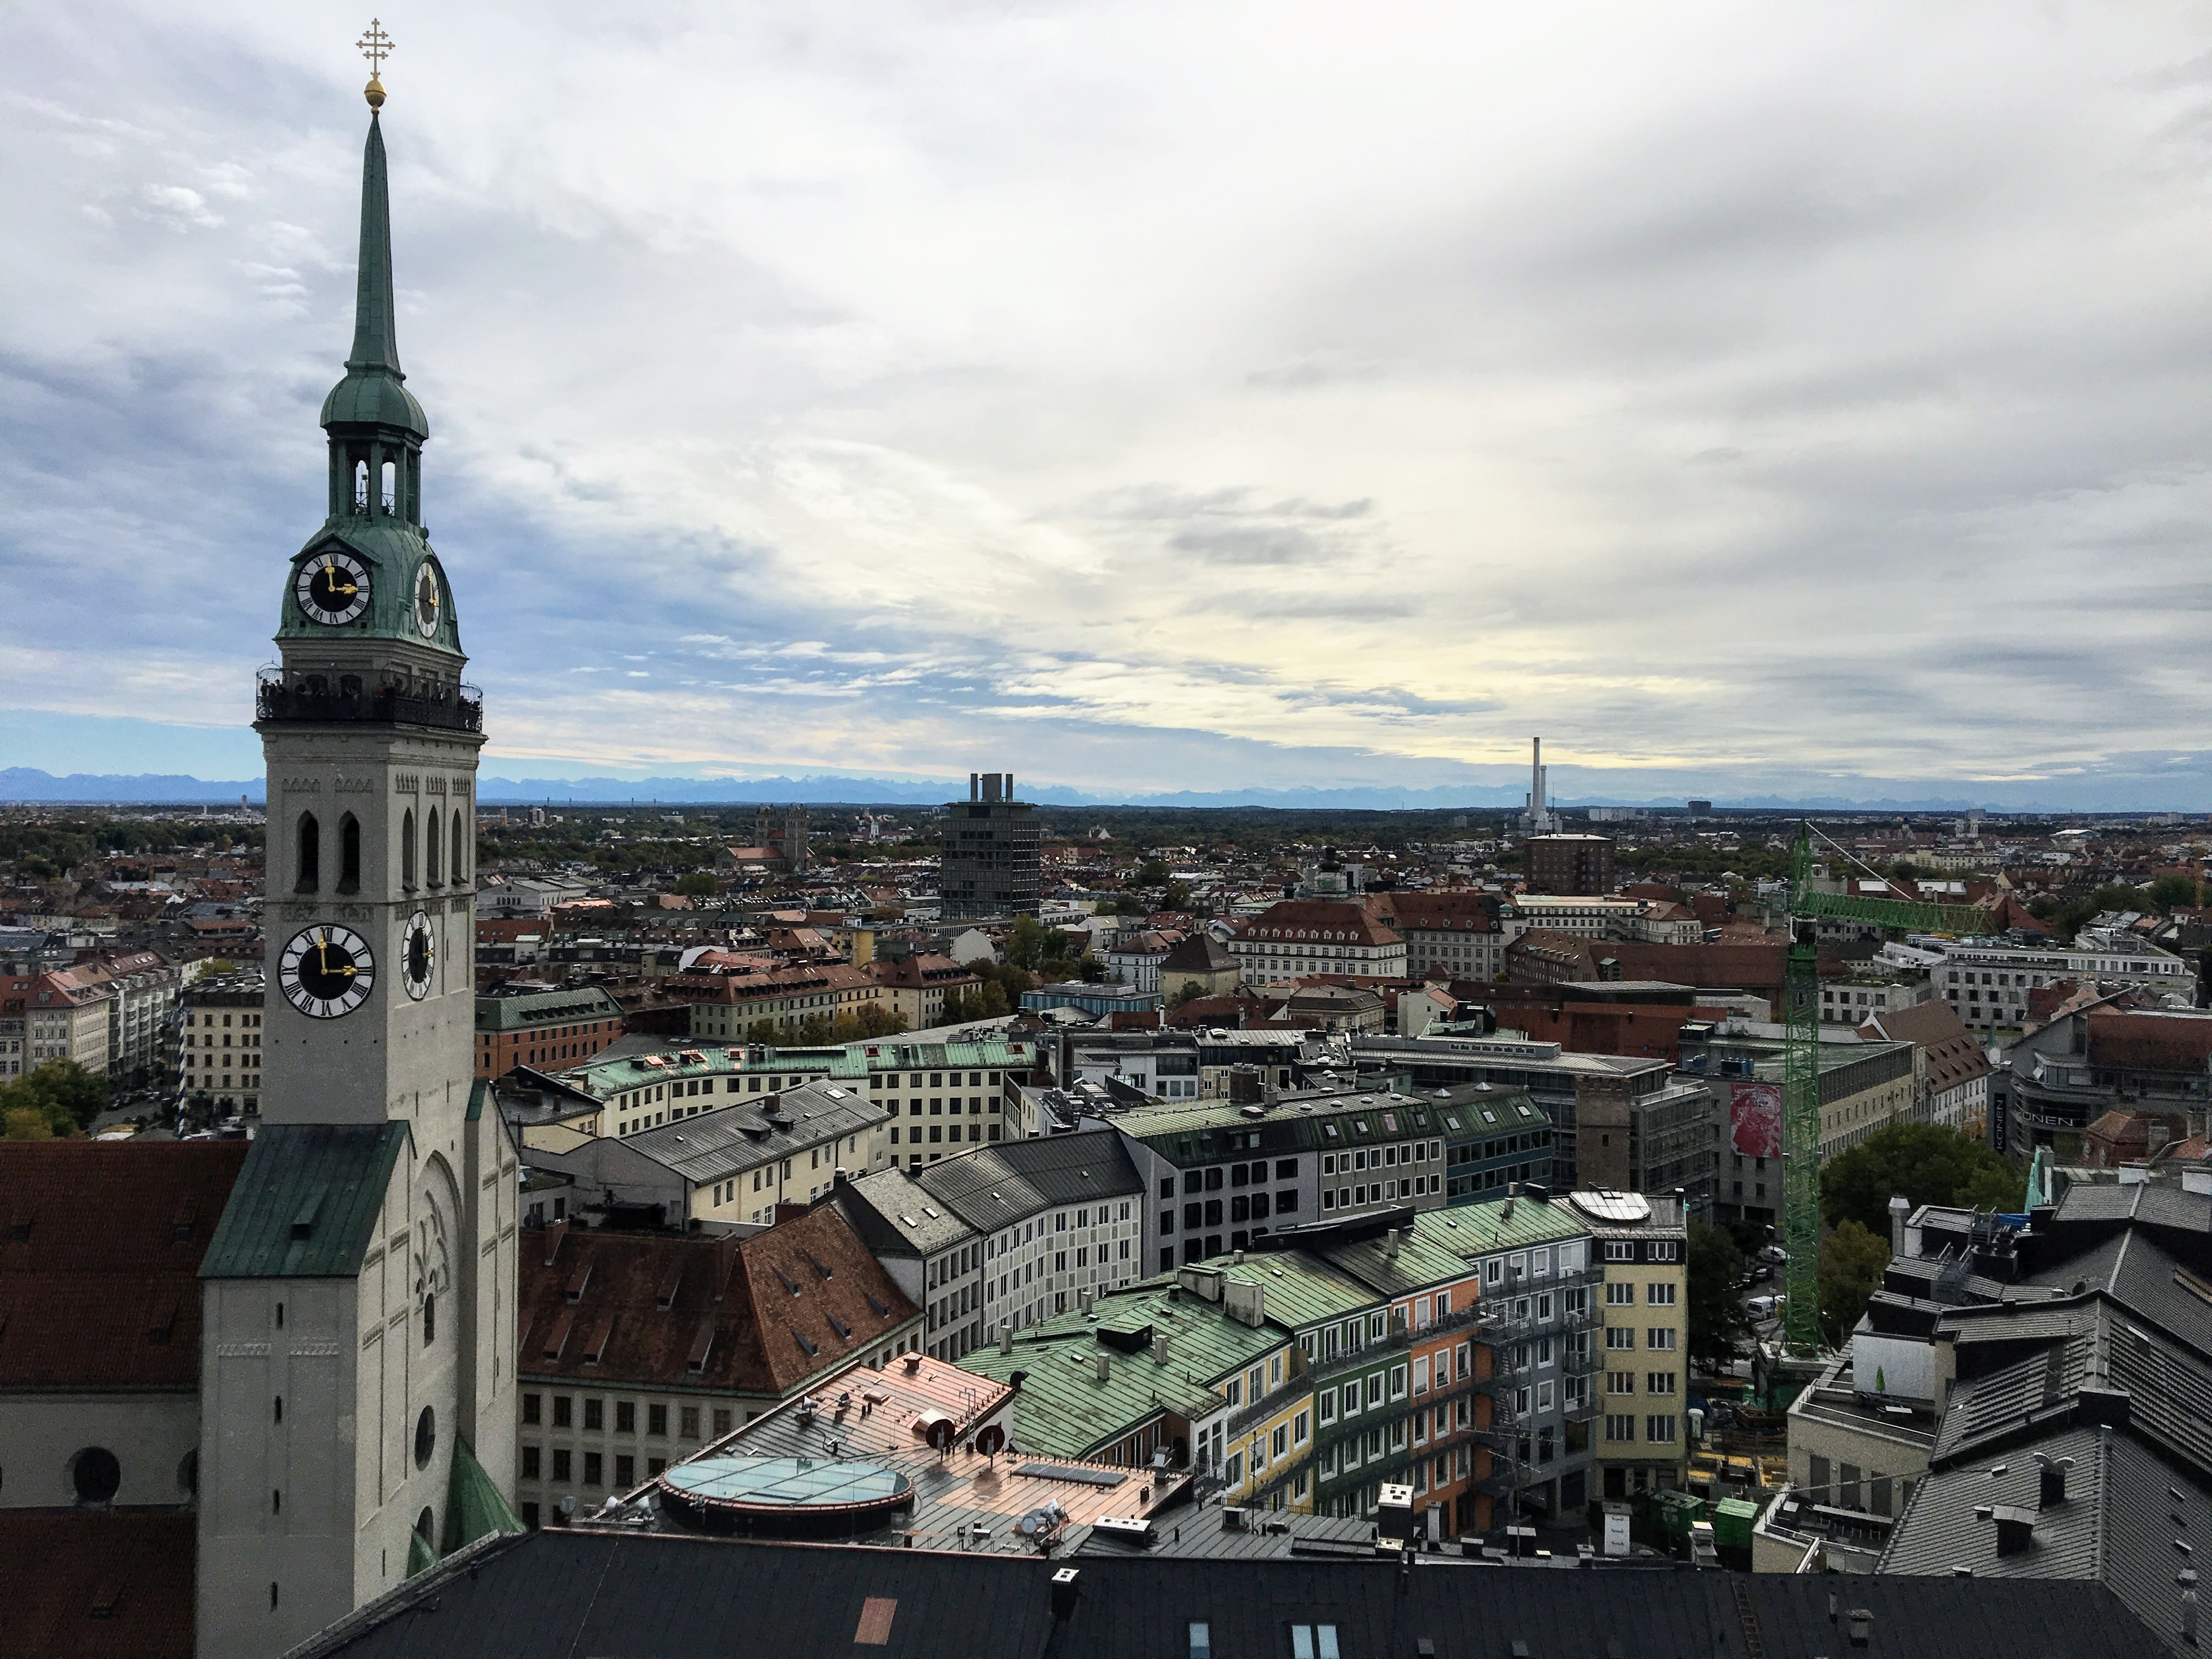 View from the to top of New Town Hall in Munich, Germany